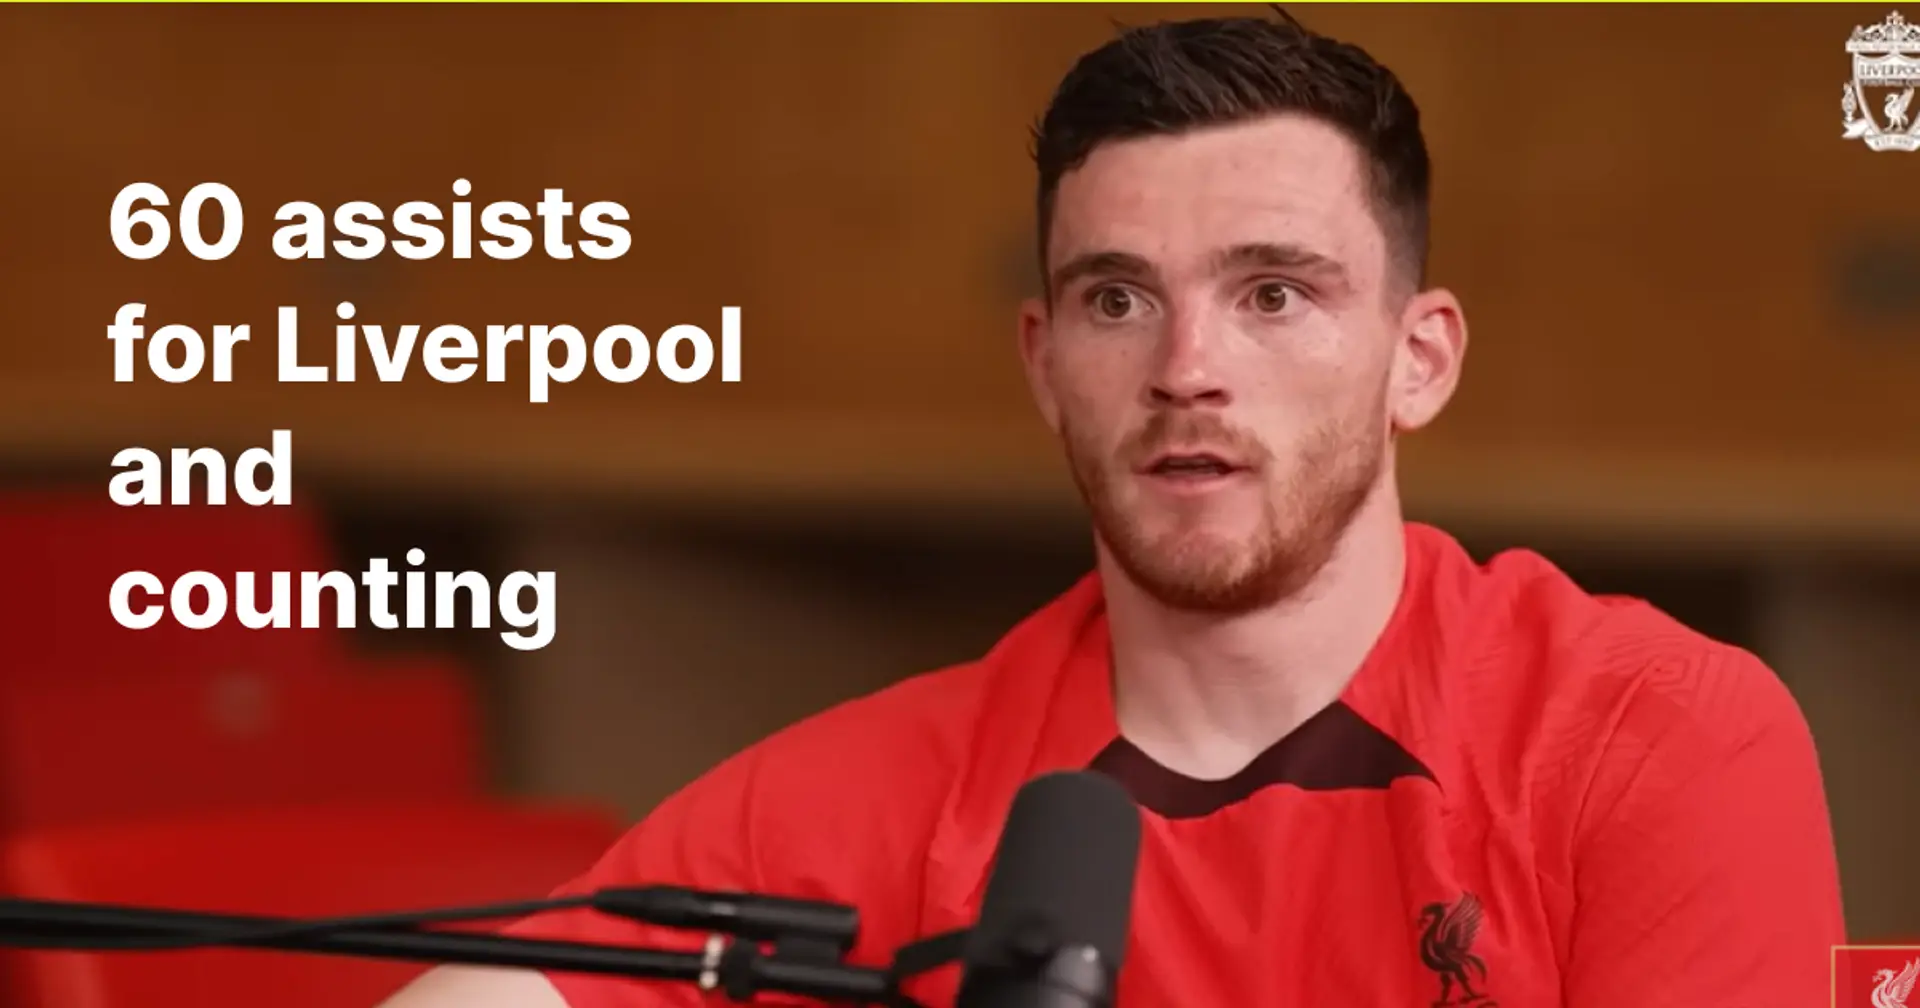 Robertson reveals person who influenced his game the most at Liverpool -- you guessed it